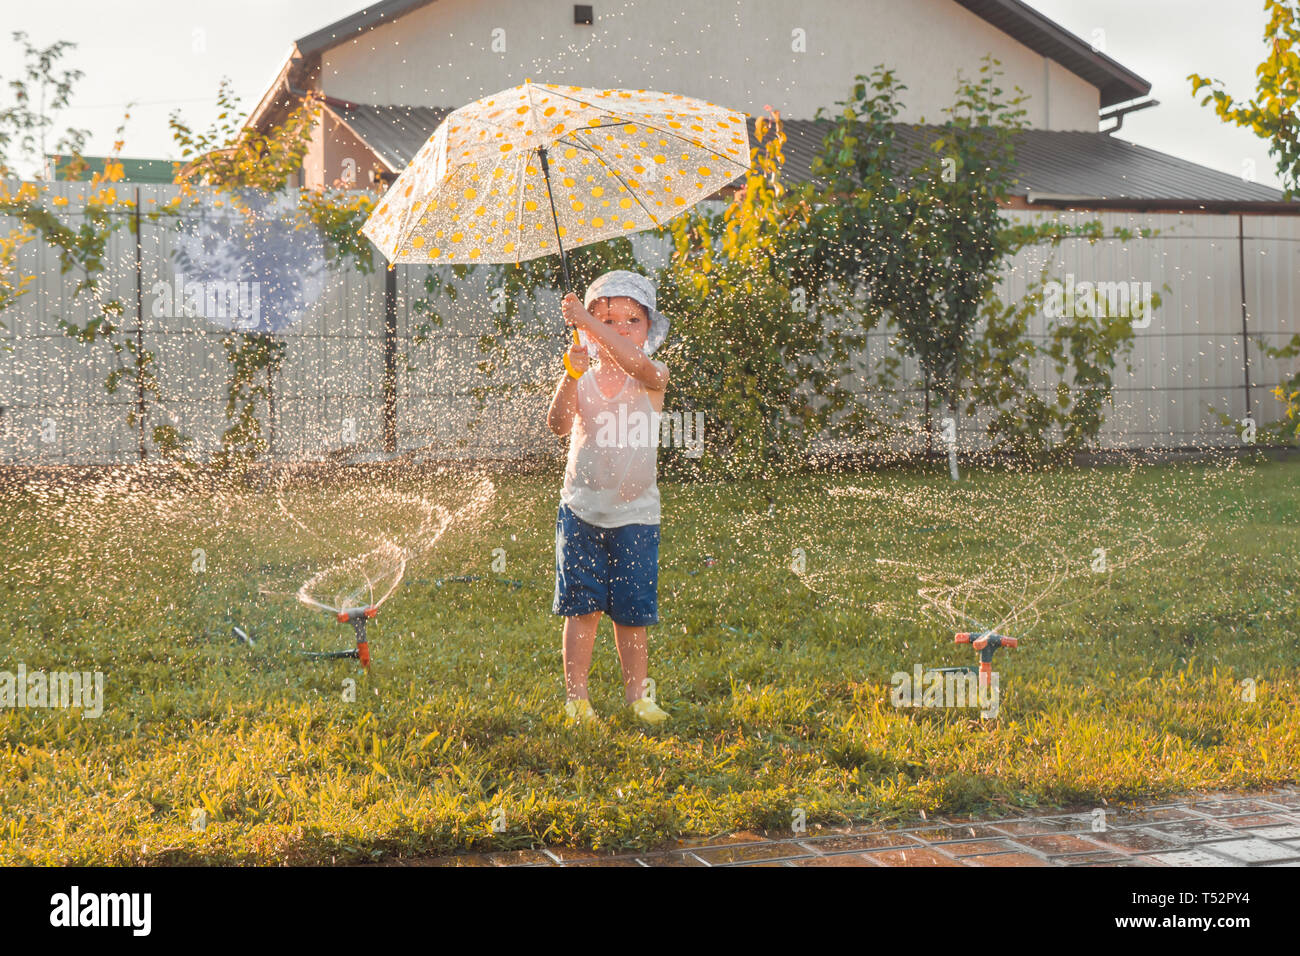 Summer activities. Children playing outdoor. Happy boy playing outdoor with watering system. Summer vacation. Summer holidays with children. Happy kid Stock Photo